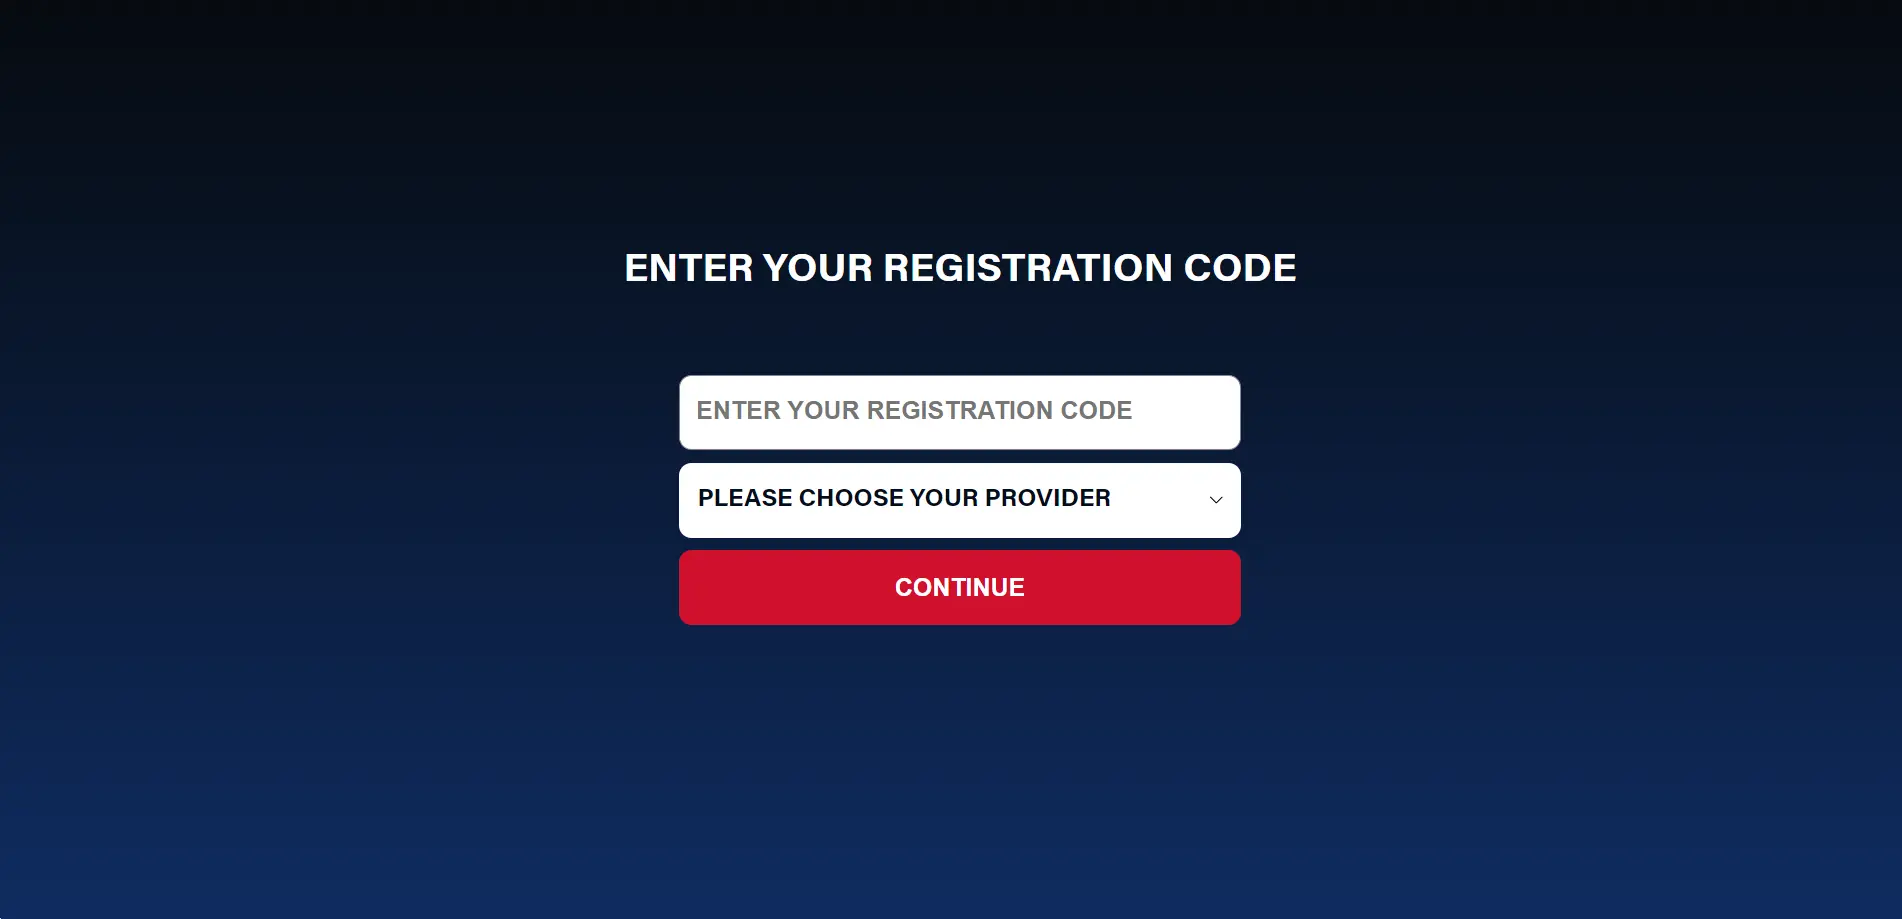 once you visit by watchmarquee/activate or watchmarquee.com/activate, User have to Enter the registration code and Select the tv Provider from the list